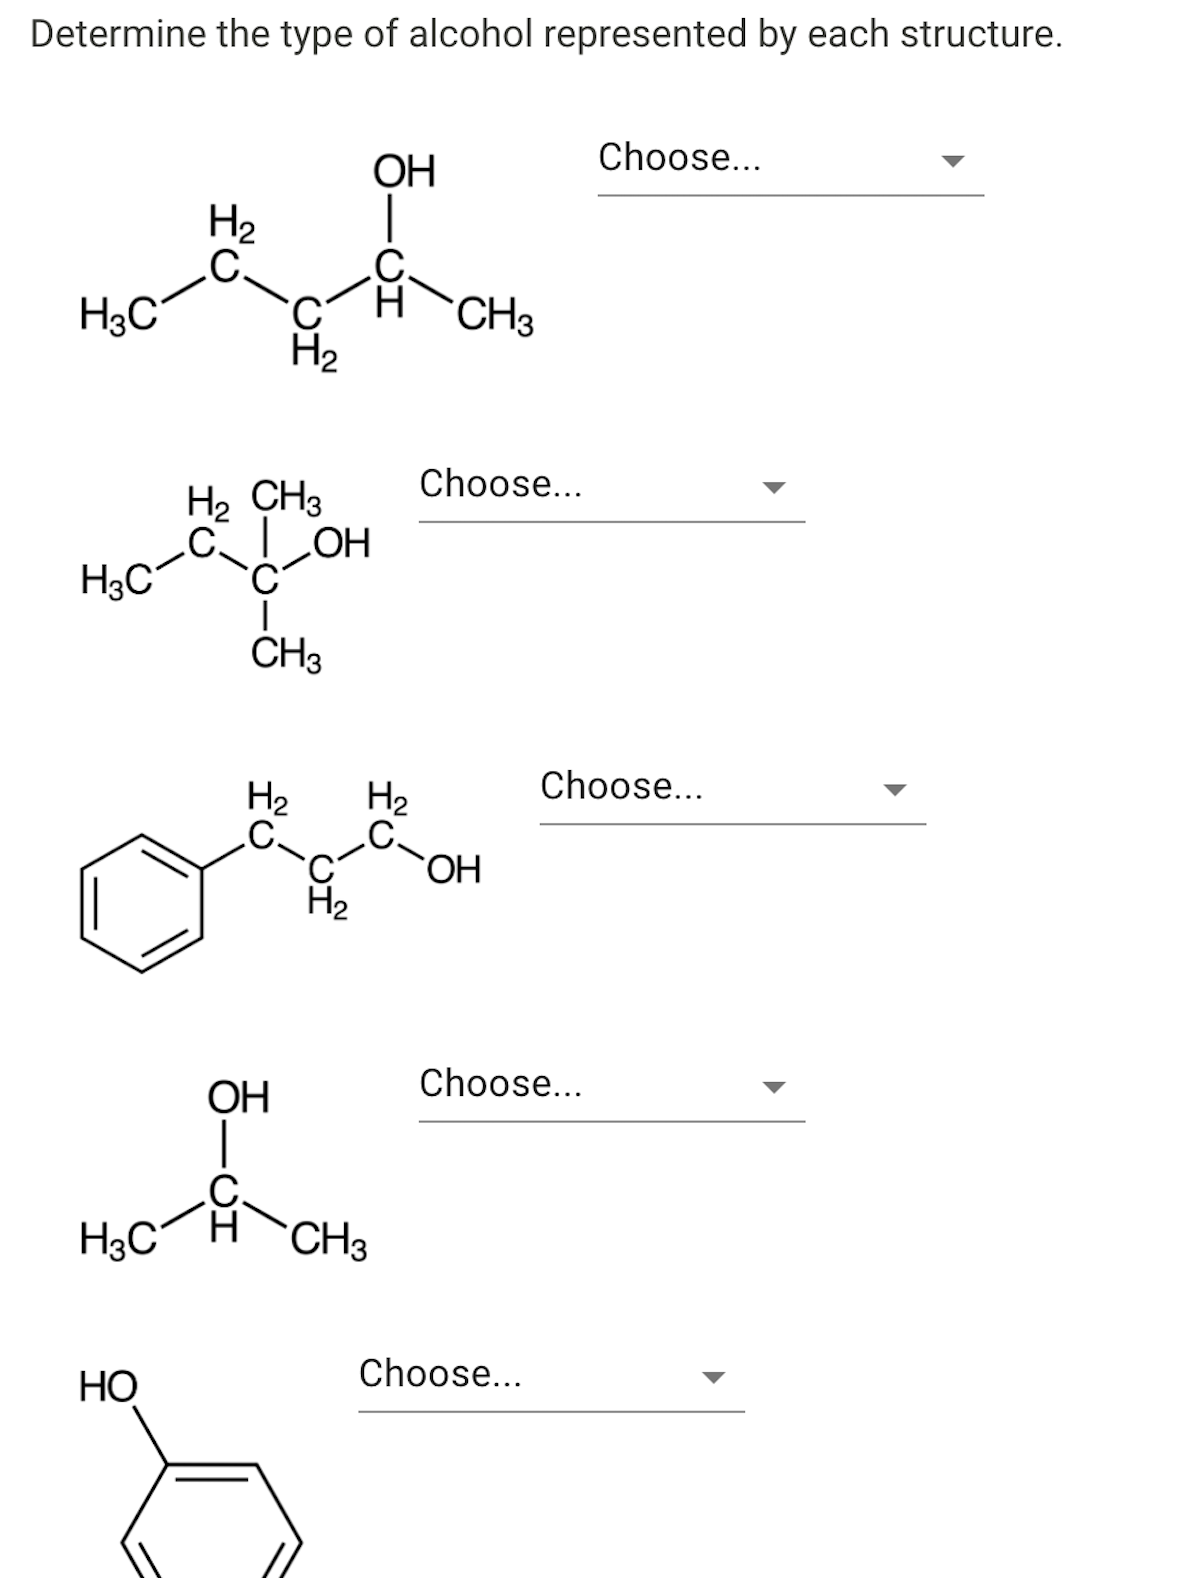 Determine the type of alcohol represented by each structure.
Choose...
OH
H2
H CH3
H2
H3C°
Choose...
H2 CH3
H3C
CH3
Choose...
H2
.C.
H2
HO.
H2
Choose...
ОН
H3C
CH3
Choose...
НО
